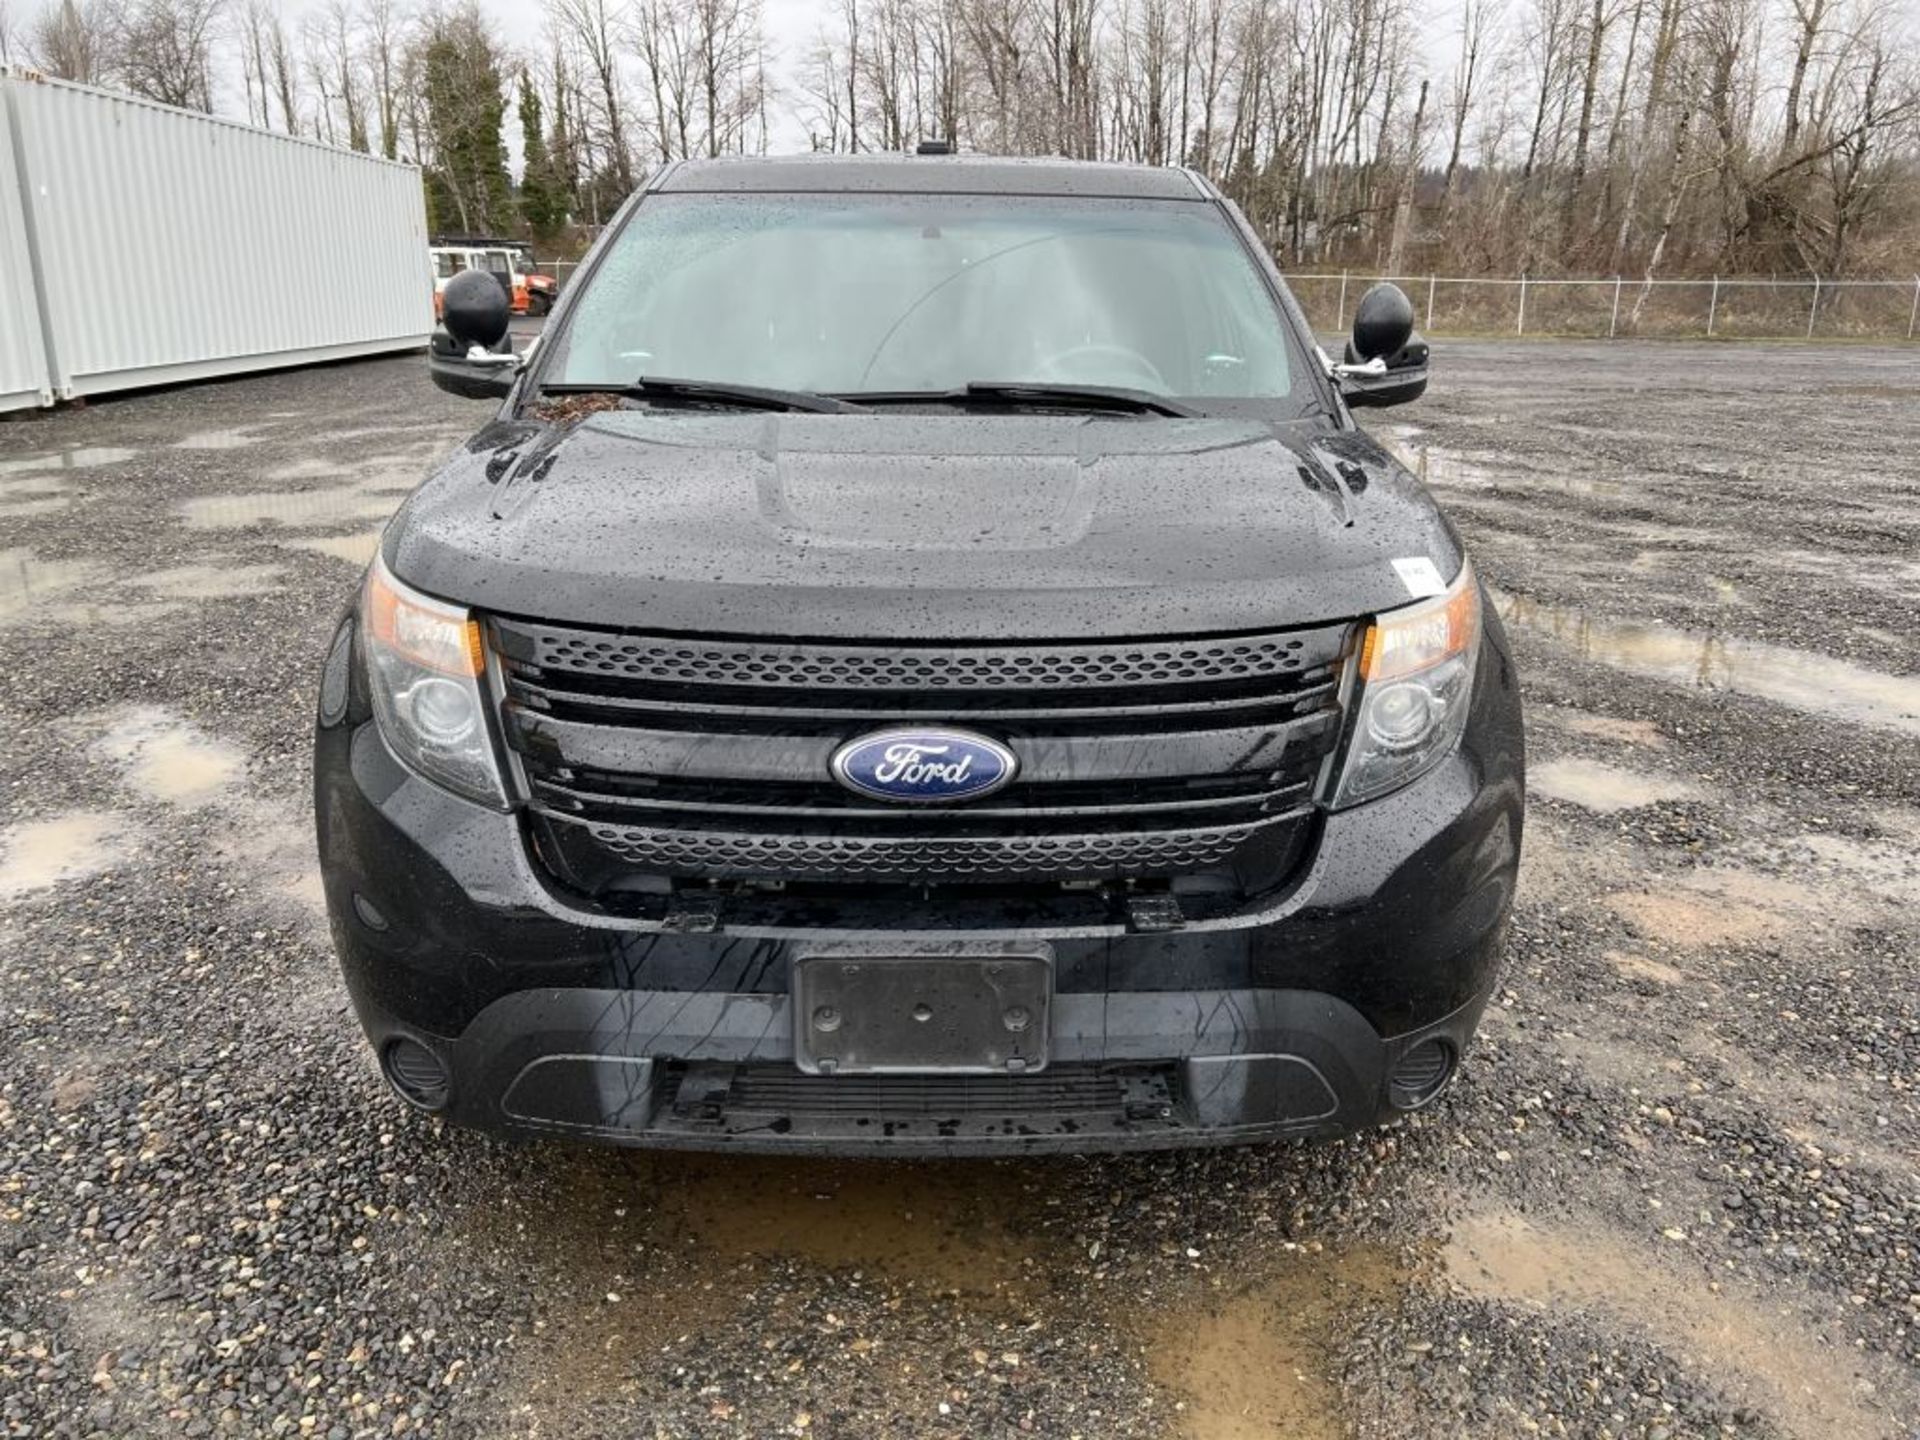 2015 Ford Explorer AWD SUV - Image 8 of 28